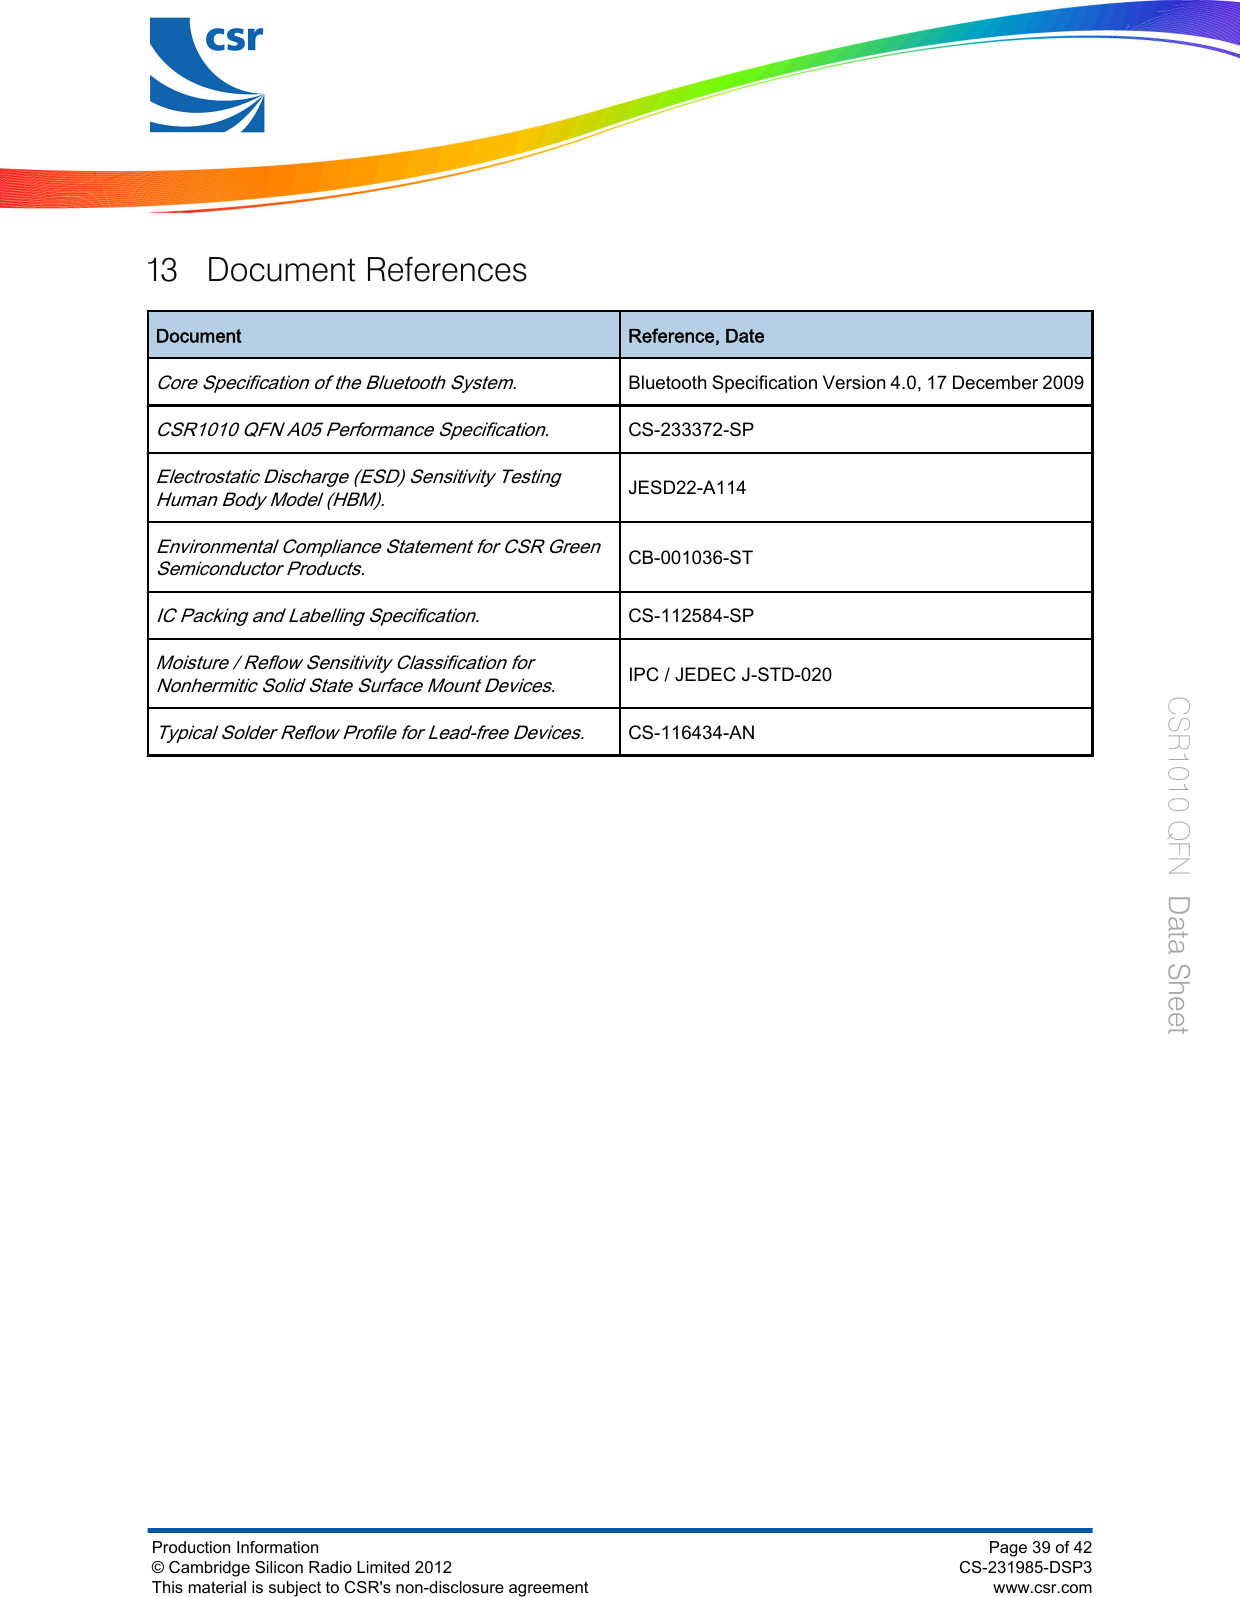 13 Document ReferencesDocument Reference, DateCore Specification of the Bluetooth System.Bluetooth Specification Version 4.0, 17 December 2009CSR1010 QFN A05 Performance Specification.CS-233372-SPElectrostatic Discharge (ESD) Sensitivity TestingHuman Body Model (HBM).JESD22-A114Environmental Compliance Statement for CSR GreenSemiconductor Products.CB-001036-STIC Packing and Labelling Specification.CS-112584-SPMoisture / Reflow Sensitivity Classification forNonhermitic Solid State Surface Mount Devices.IPC / JEDEC J-STD-020Typical Solder Reflow Profile for Lead-free Devices.CS-116434-ANProduction Information© Cambridge Silicon Radio Limited 2012This material is subject to CSR&apos;s non-disclosure agreementPage 39 of 42CS-231985-DSP3www.csr.comCSR1010 QFN  Data Sheet